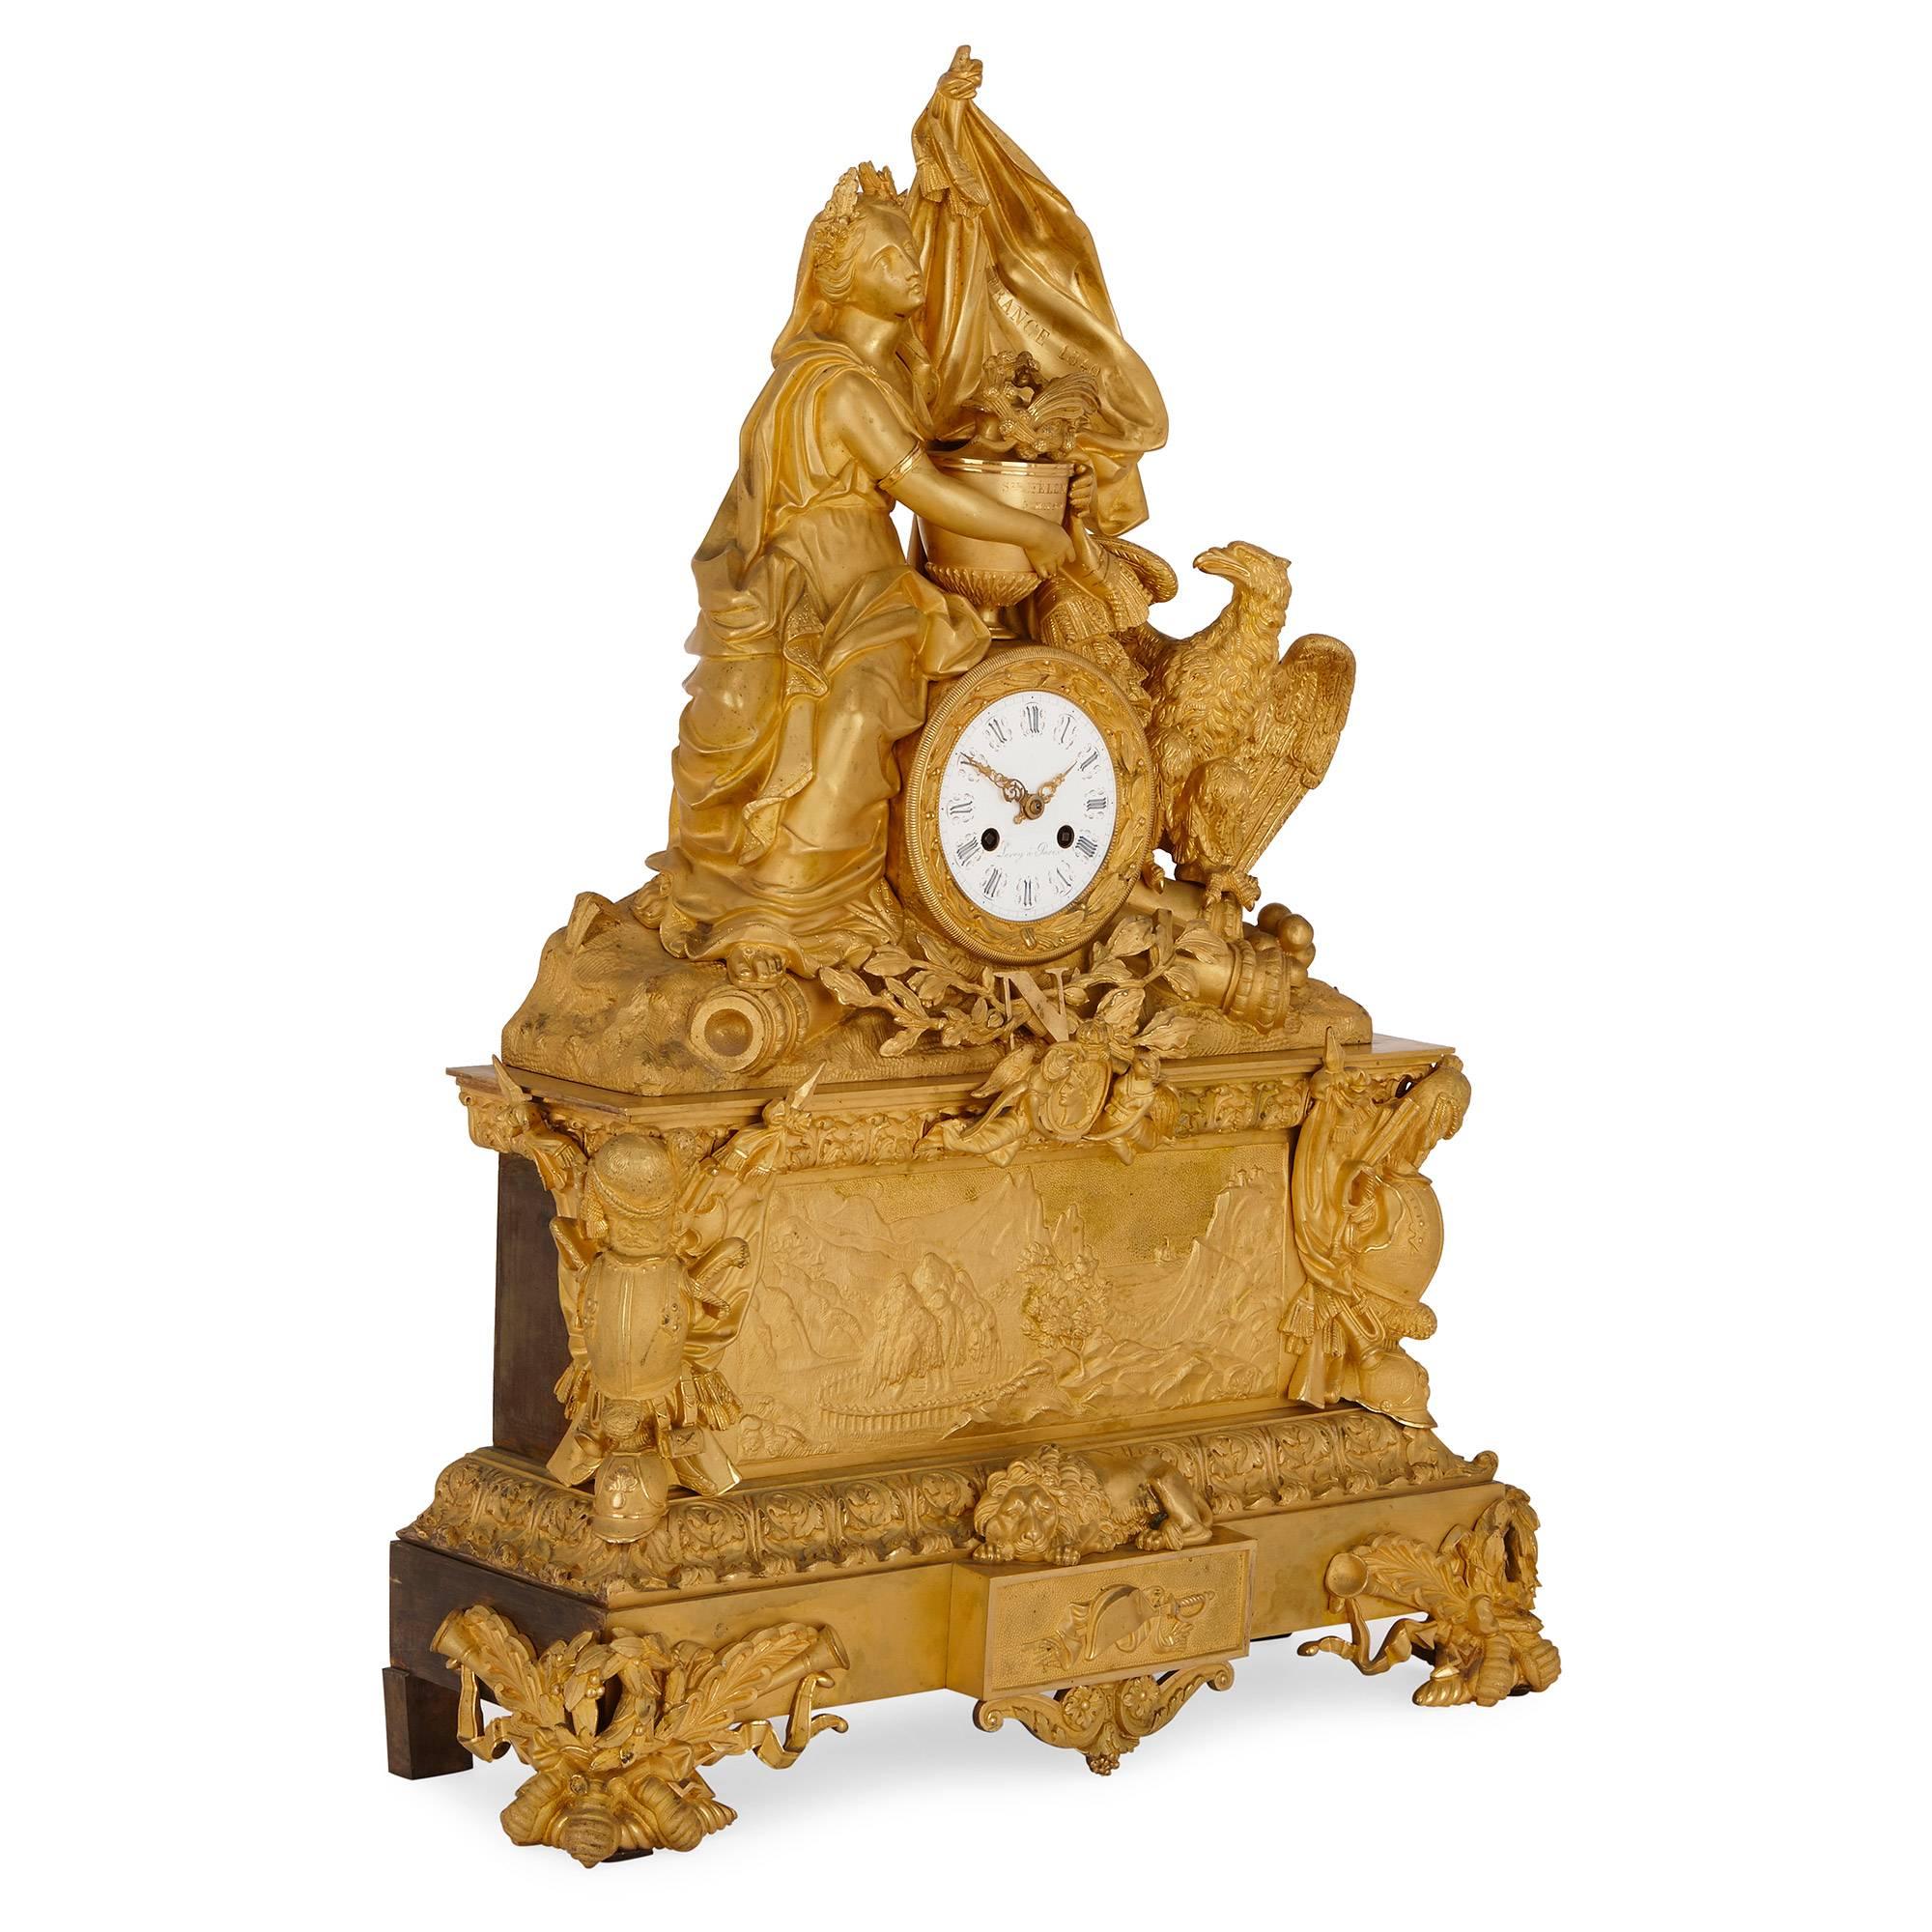 This fine mantel clock is cast entirely in ormolu by celebrated Parisian clockmaker Leroy and commemorates the return of Napoleon's ashes to France in 1840. The clock is set on a rectangular, tiered base with four decorative feet. The lower tier is